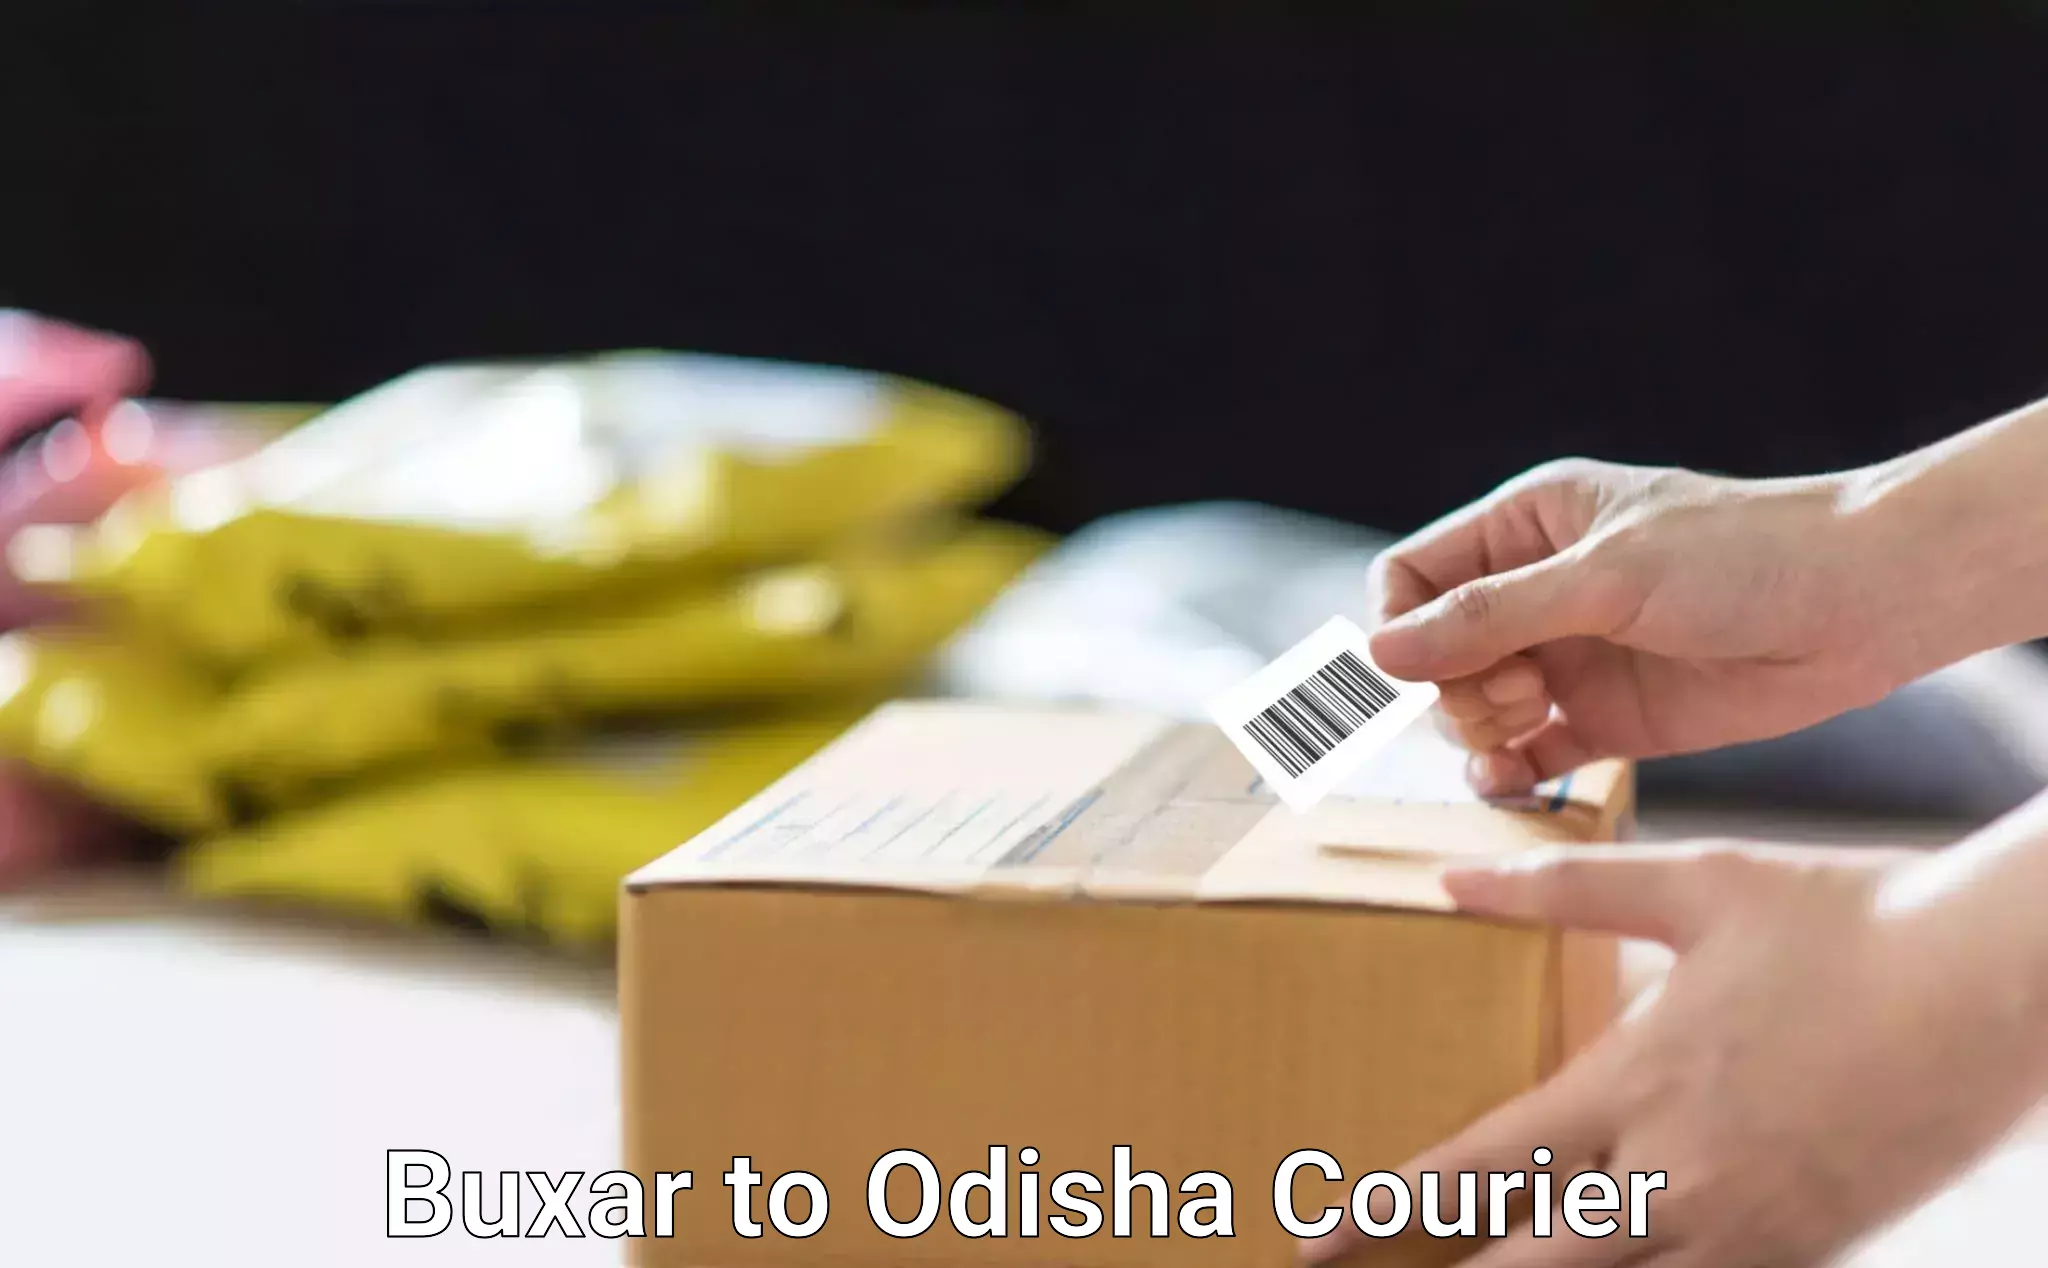 Budget-friendly movers in Buxar to Kesinga